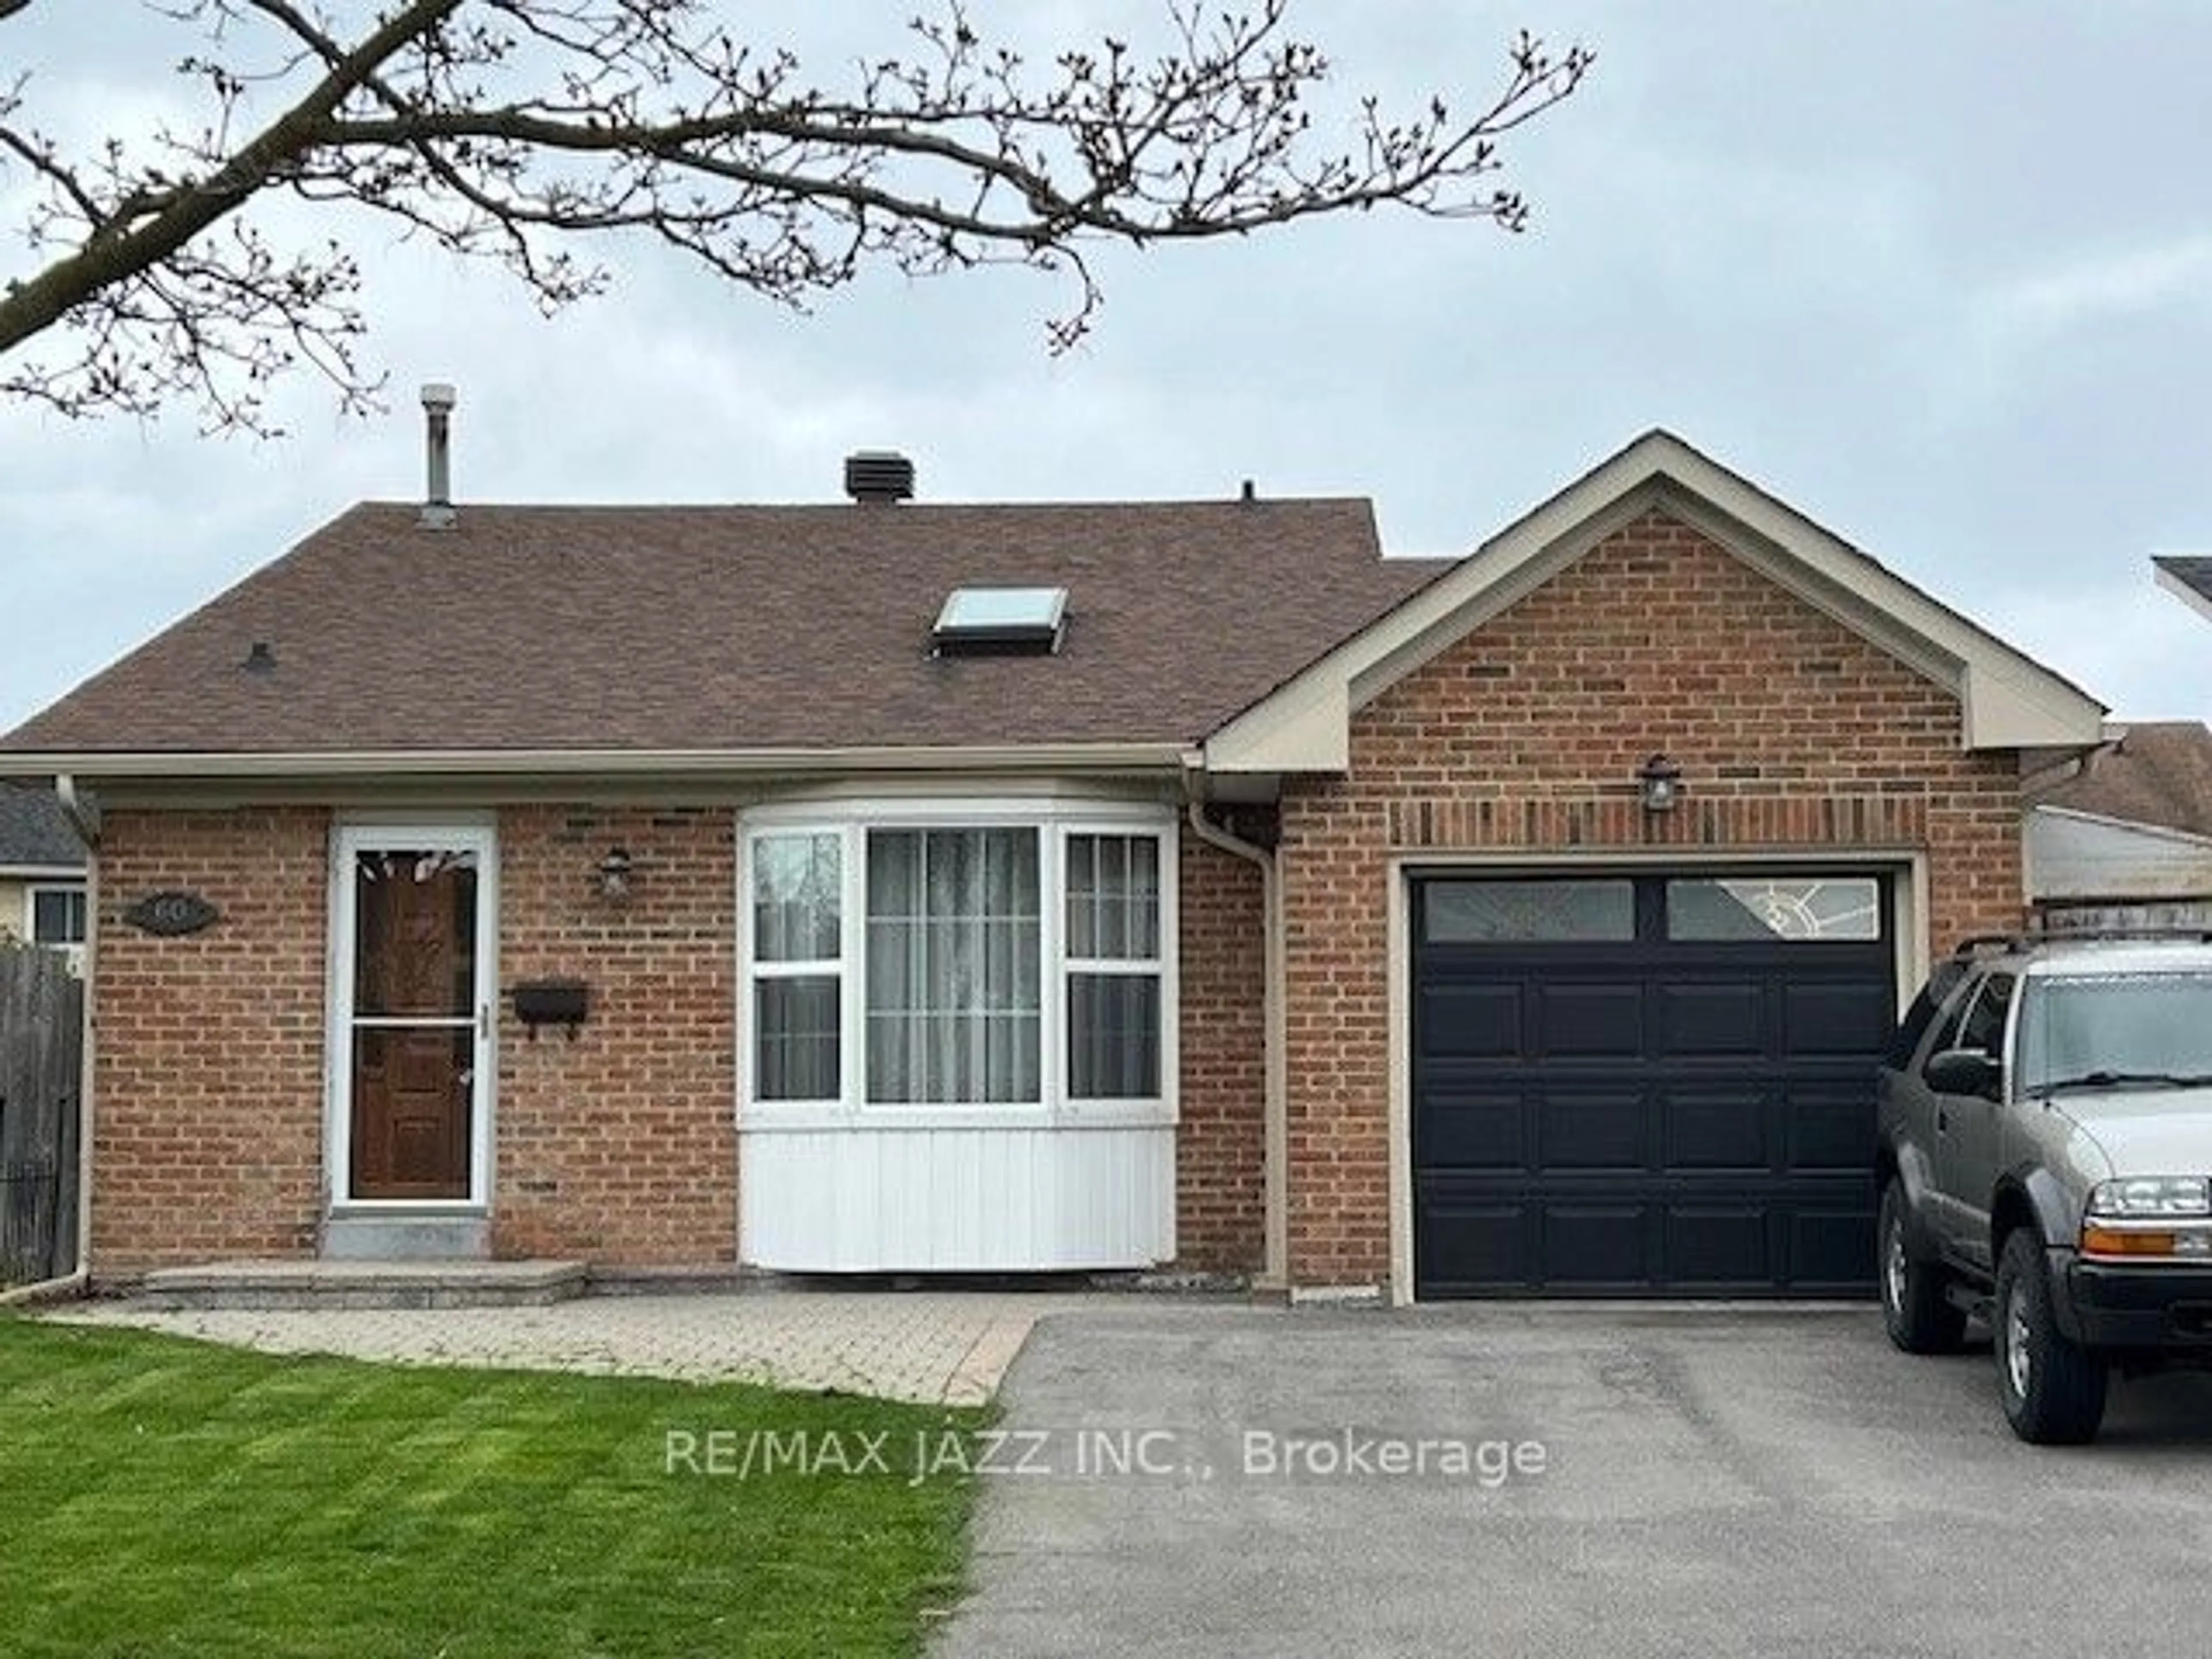 Home with brick exterior material for 60 Brooksbank Cres, Ajax Ontario L1S 3R7